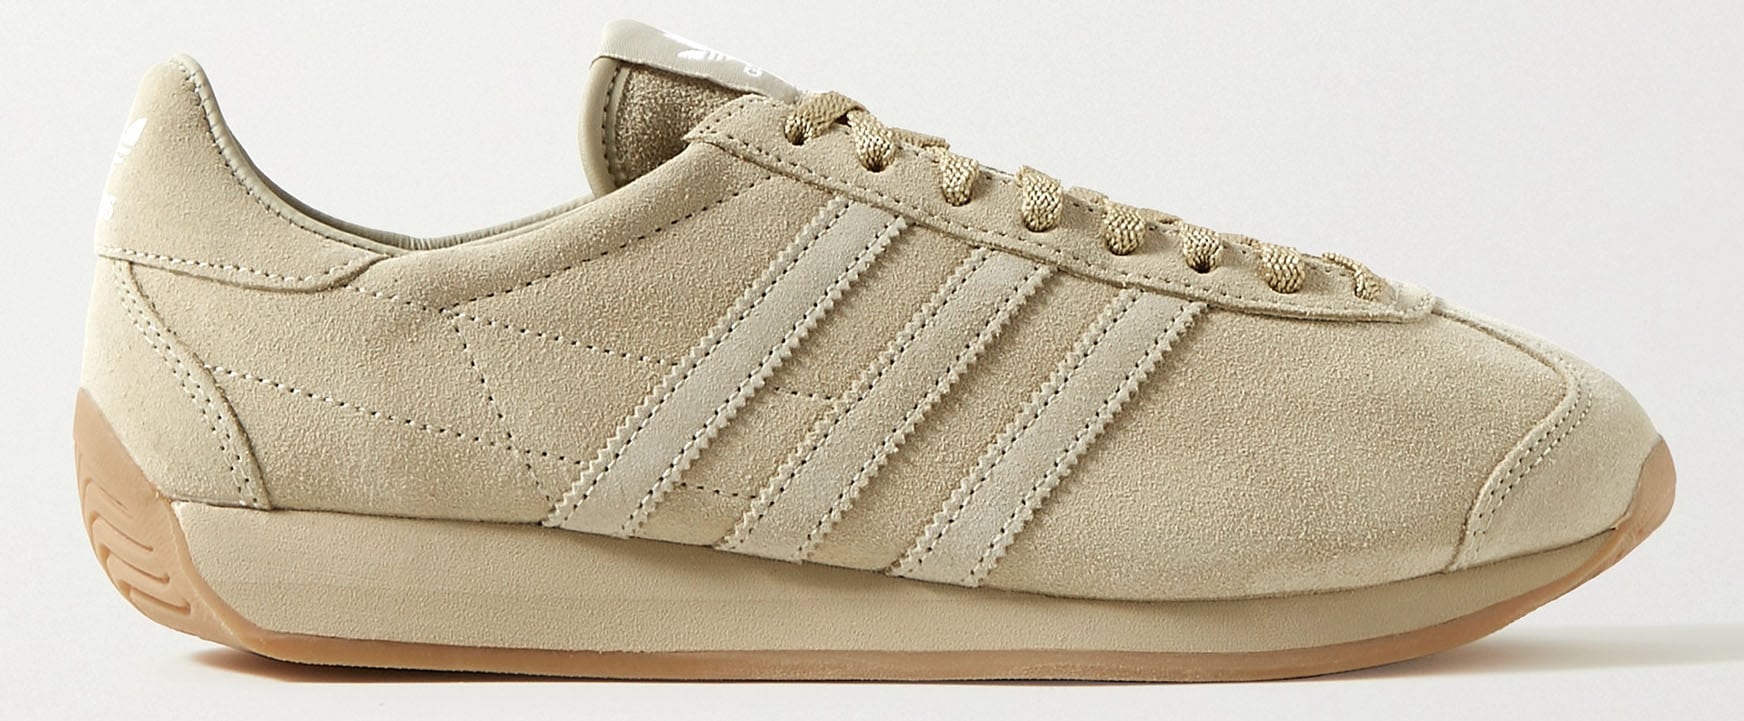 These Khaite + Adidas Originals sneakers have sand suede uppers subtly detailed with the iconic side stripes and set on a streamlined rubber sole